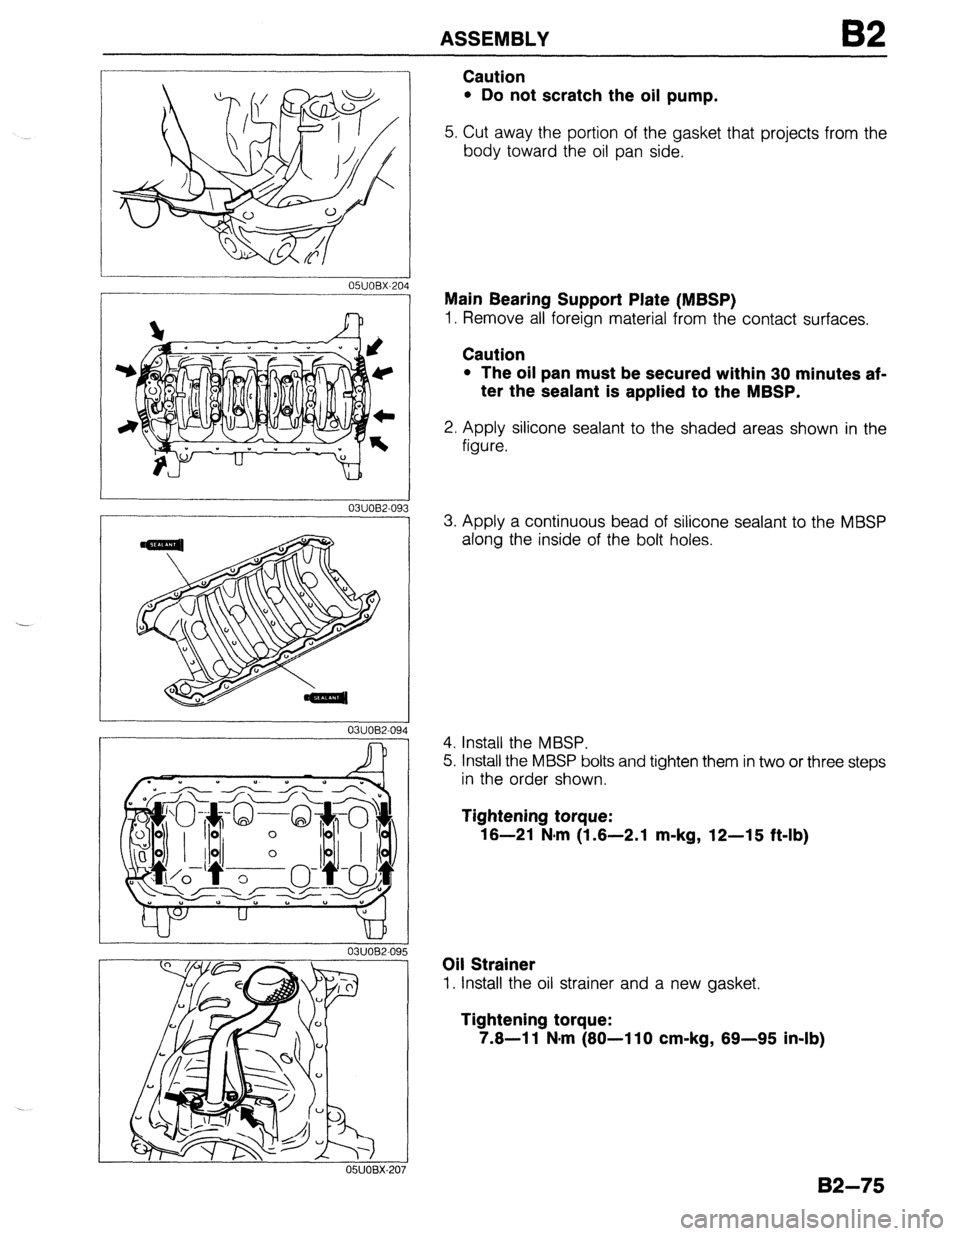 MAZDA PROTEGE 1992  Workshop Manual ASSEMBLY 82 
03UOB2-09 
03UOB2-094 
- 
Caution 
l Do not scratch the oil pump. 
5. Cut away the portion of the gasket that projects from the 
body toward the oil pan side. 
Main Bearing Support Plate 